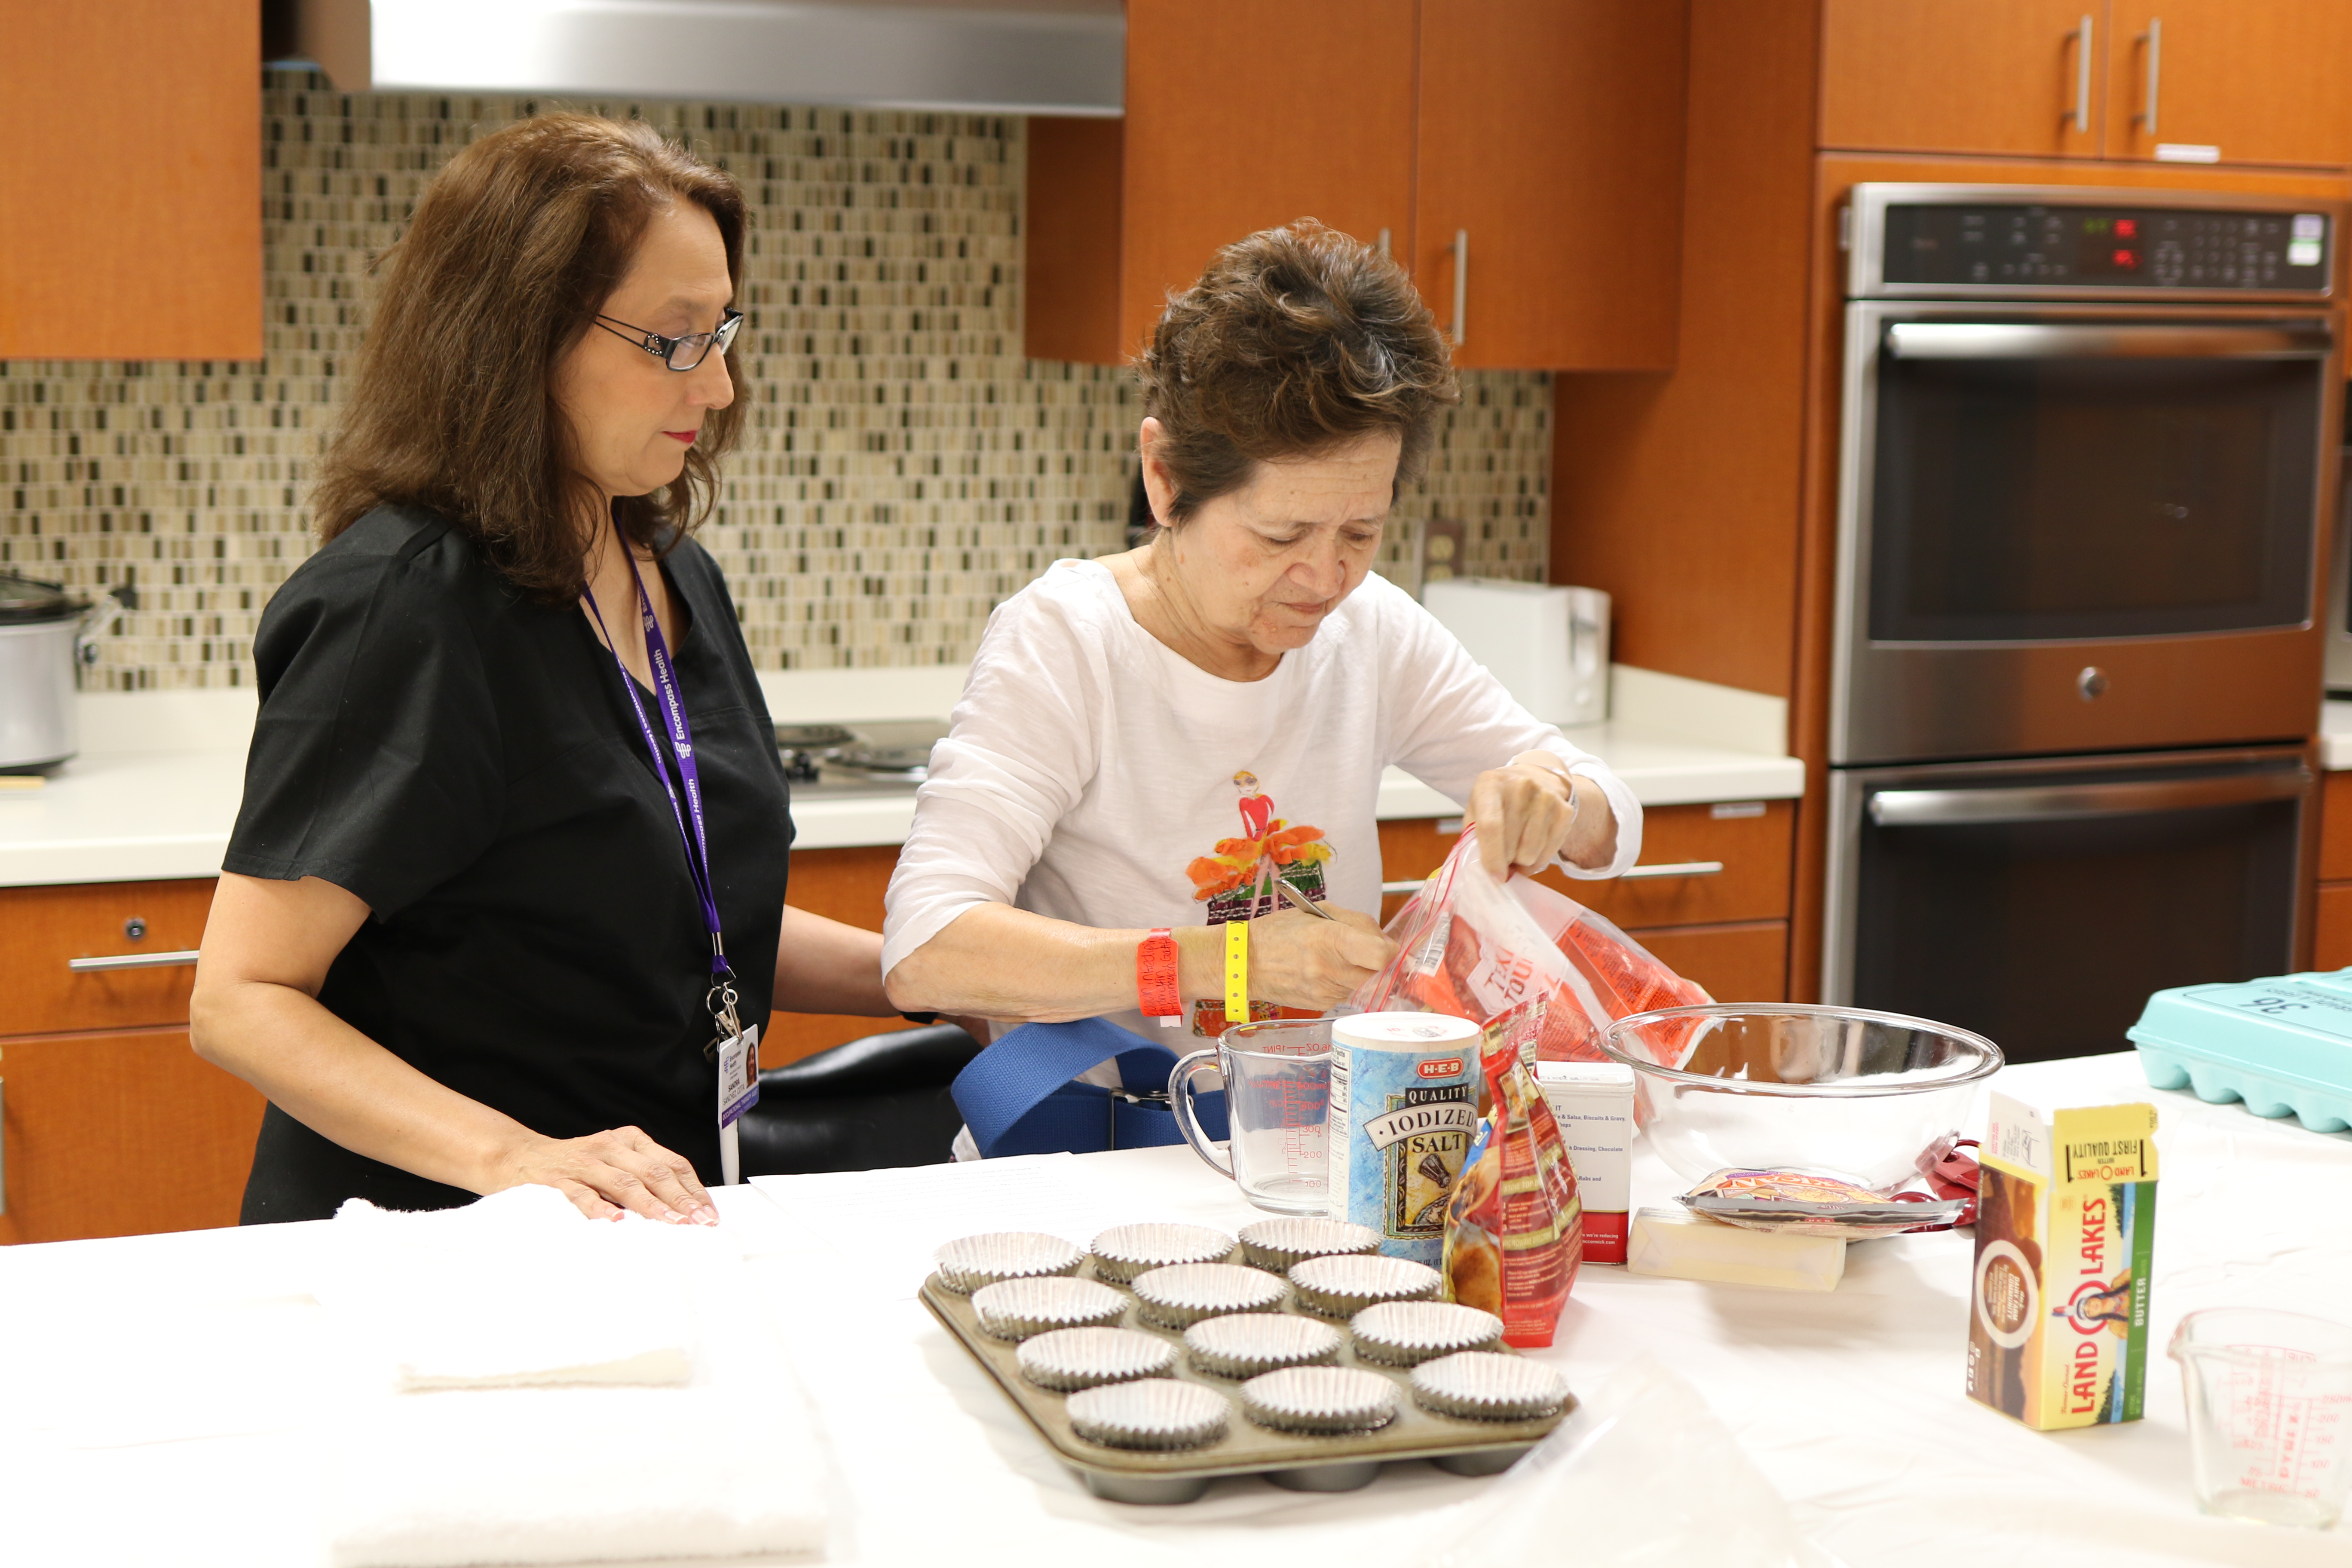 Female therapist works with female patient on making muffins in the activities of daily living kitchen at inpatient rehabilitation hospital